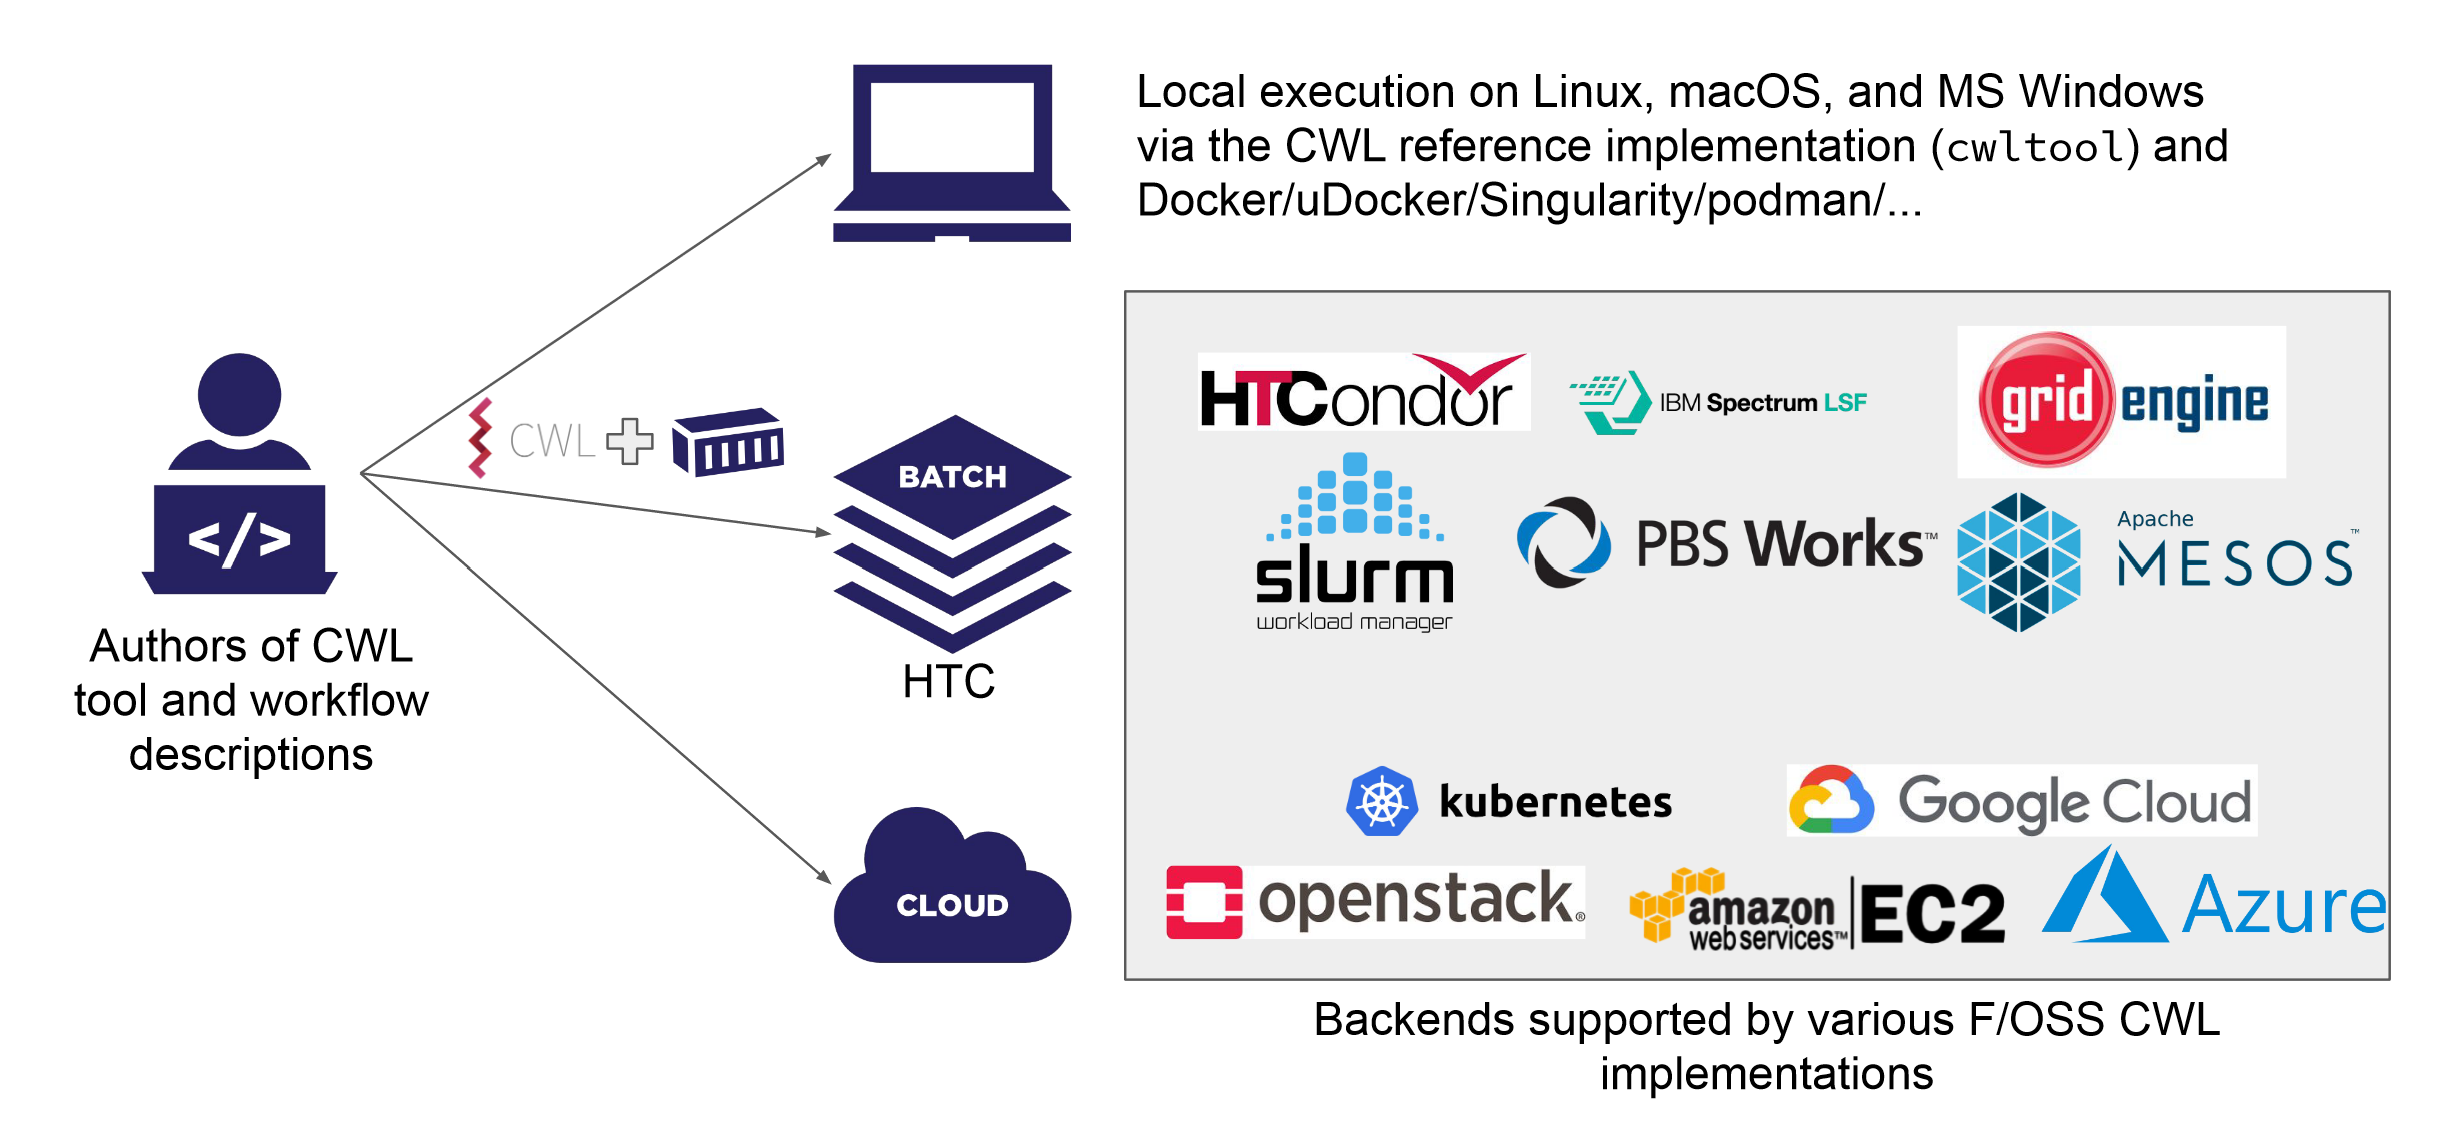 Authors of CWL tool and workfow descriptions send CWL to laptop, batch cluster or cloud. They do local execution with Linux, macOS, and Windows via the CWL reference implementation cwltool, and Docker/singularity/uDocker. Backends supported by the various Free-Open-Source CWL implementations include HTCondor, IBM Spectrum LSF, grid engine, Slurm, PBS works, Apache Mesos, Kubernetes, Google Cloud, openstack, Amazon EC2, Azure.